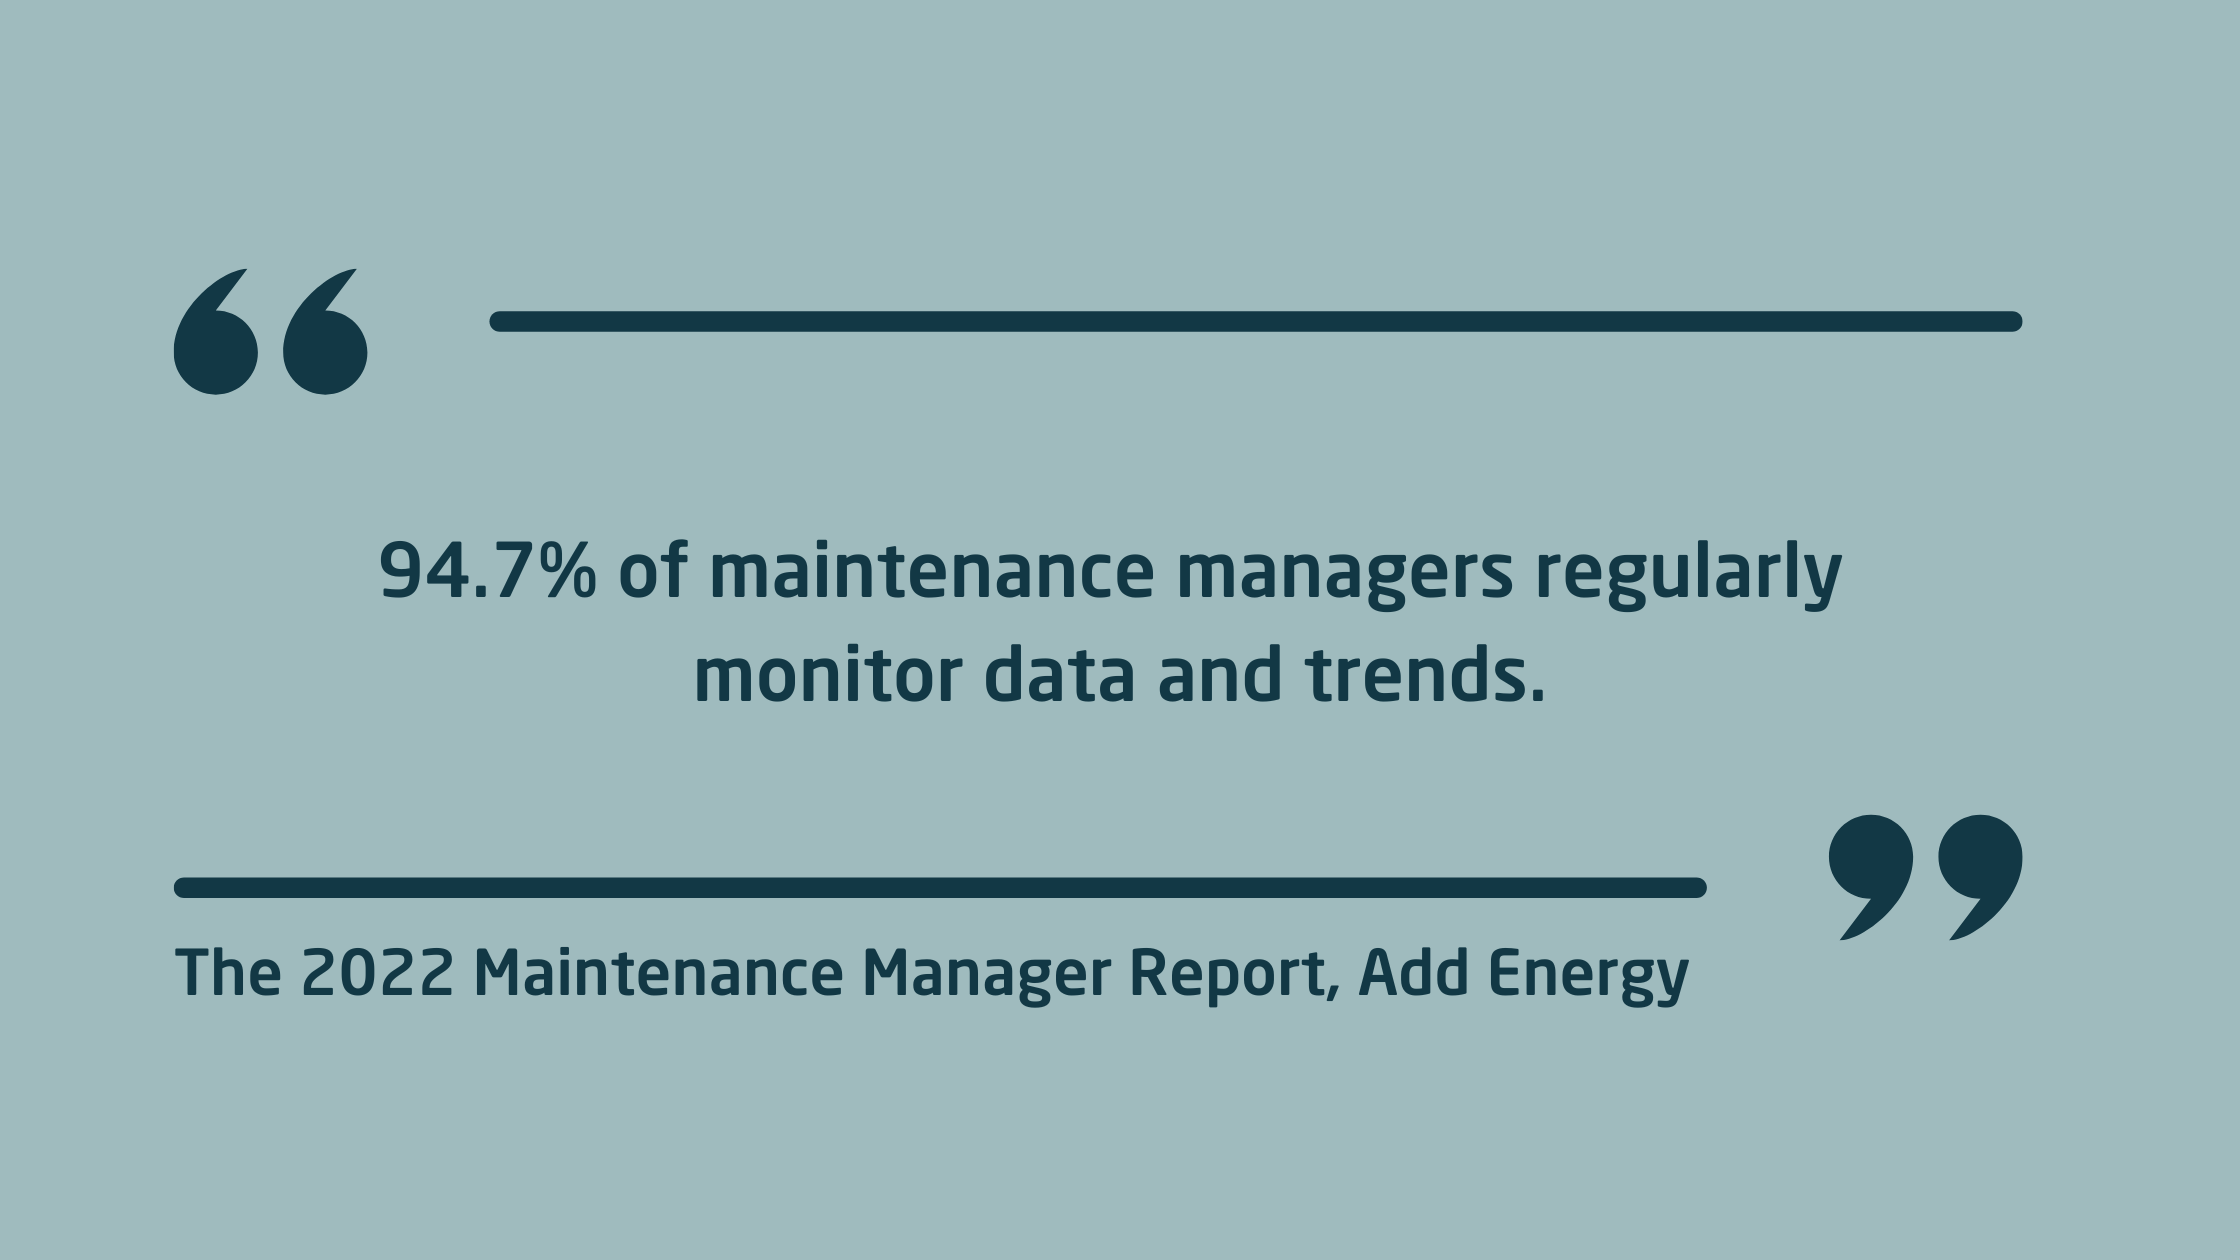 94.7% of maintenance managers regularly monitor data and trends.